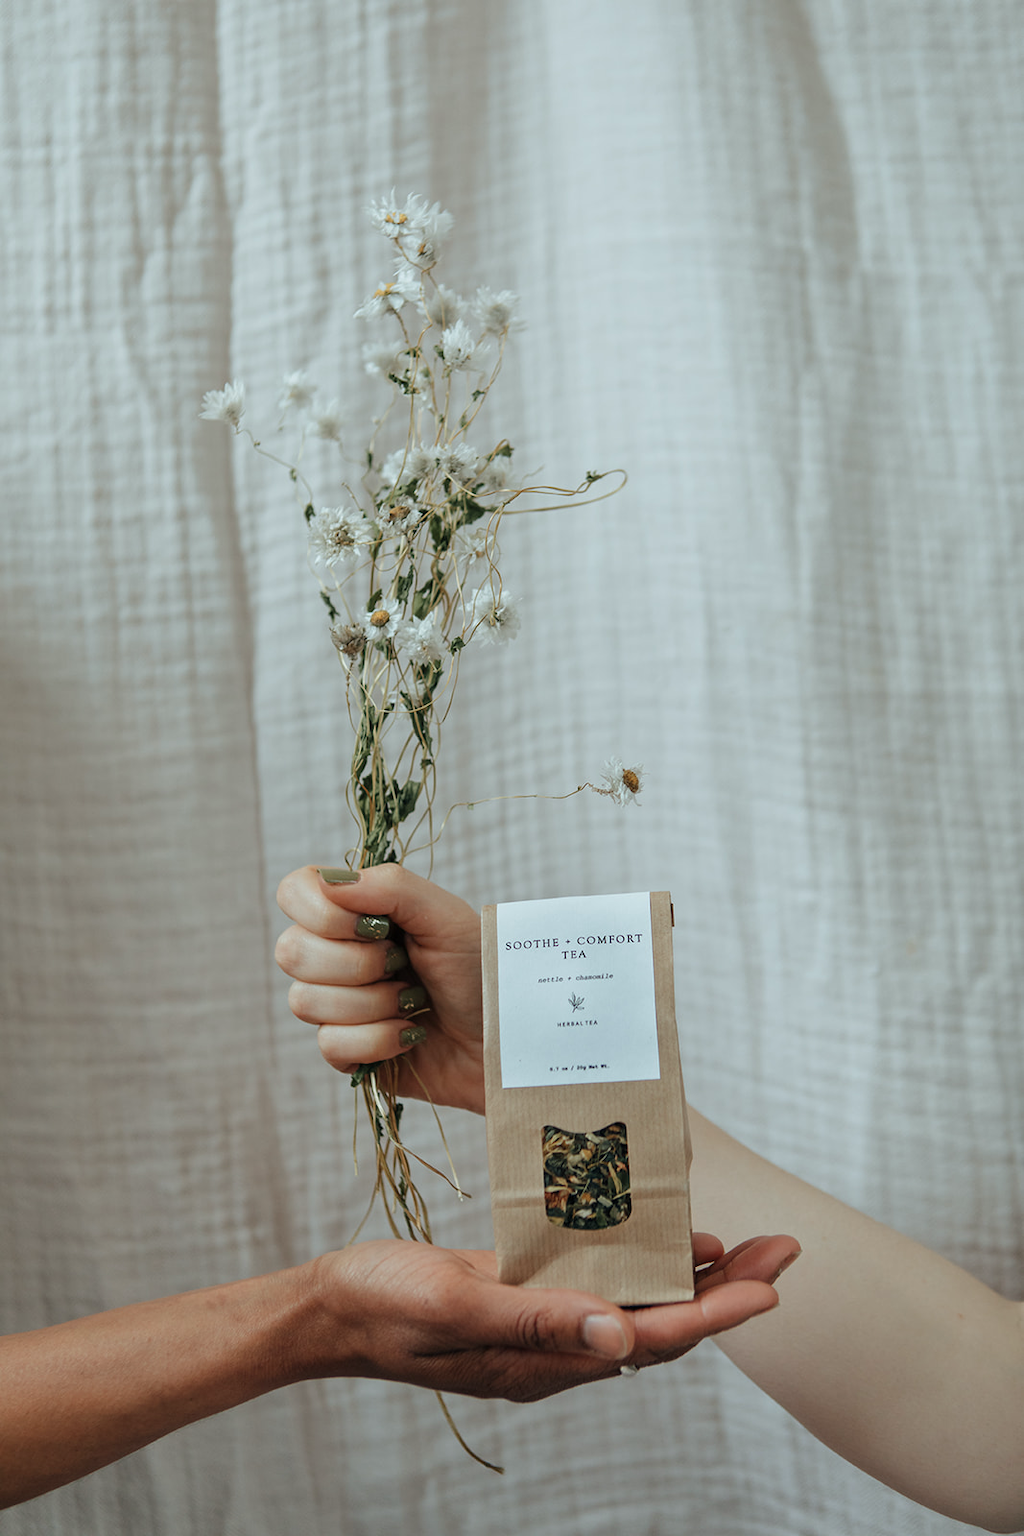 Forage Botanicals Soothe and Comfort Tea. Vegan stress relief tea. One hand is holding the bag of tea in their palm, while another hand crosses it from behind holding a bunch of dried chamomile flowers.